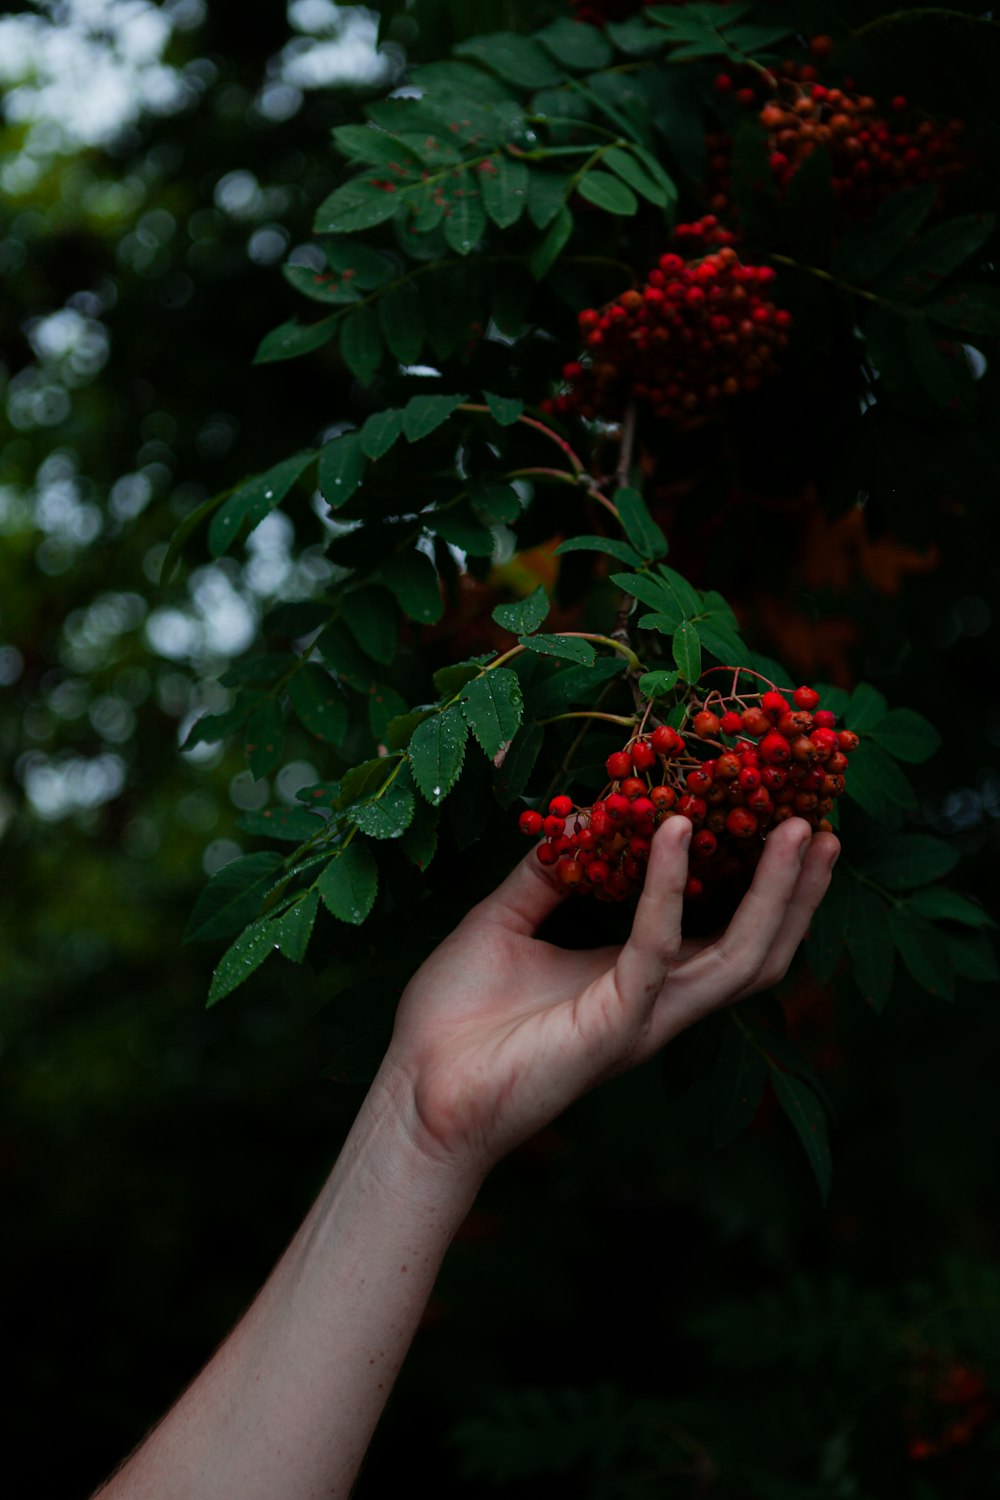 a hand holding a red berry